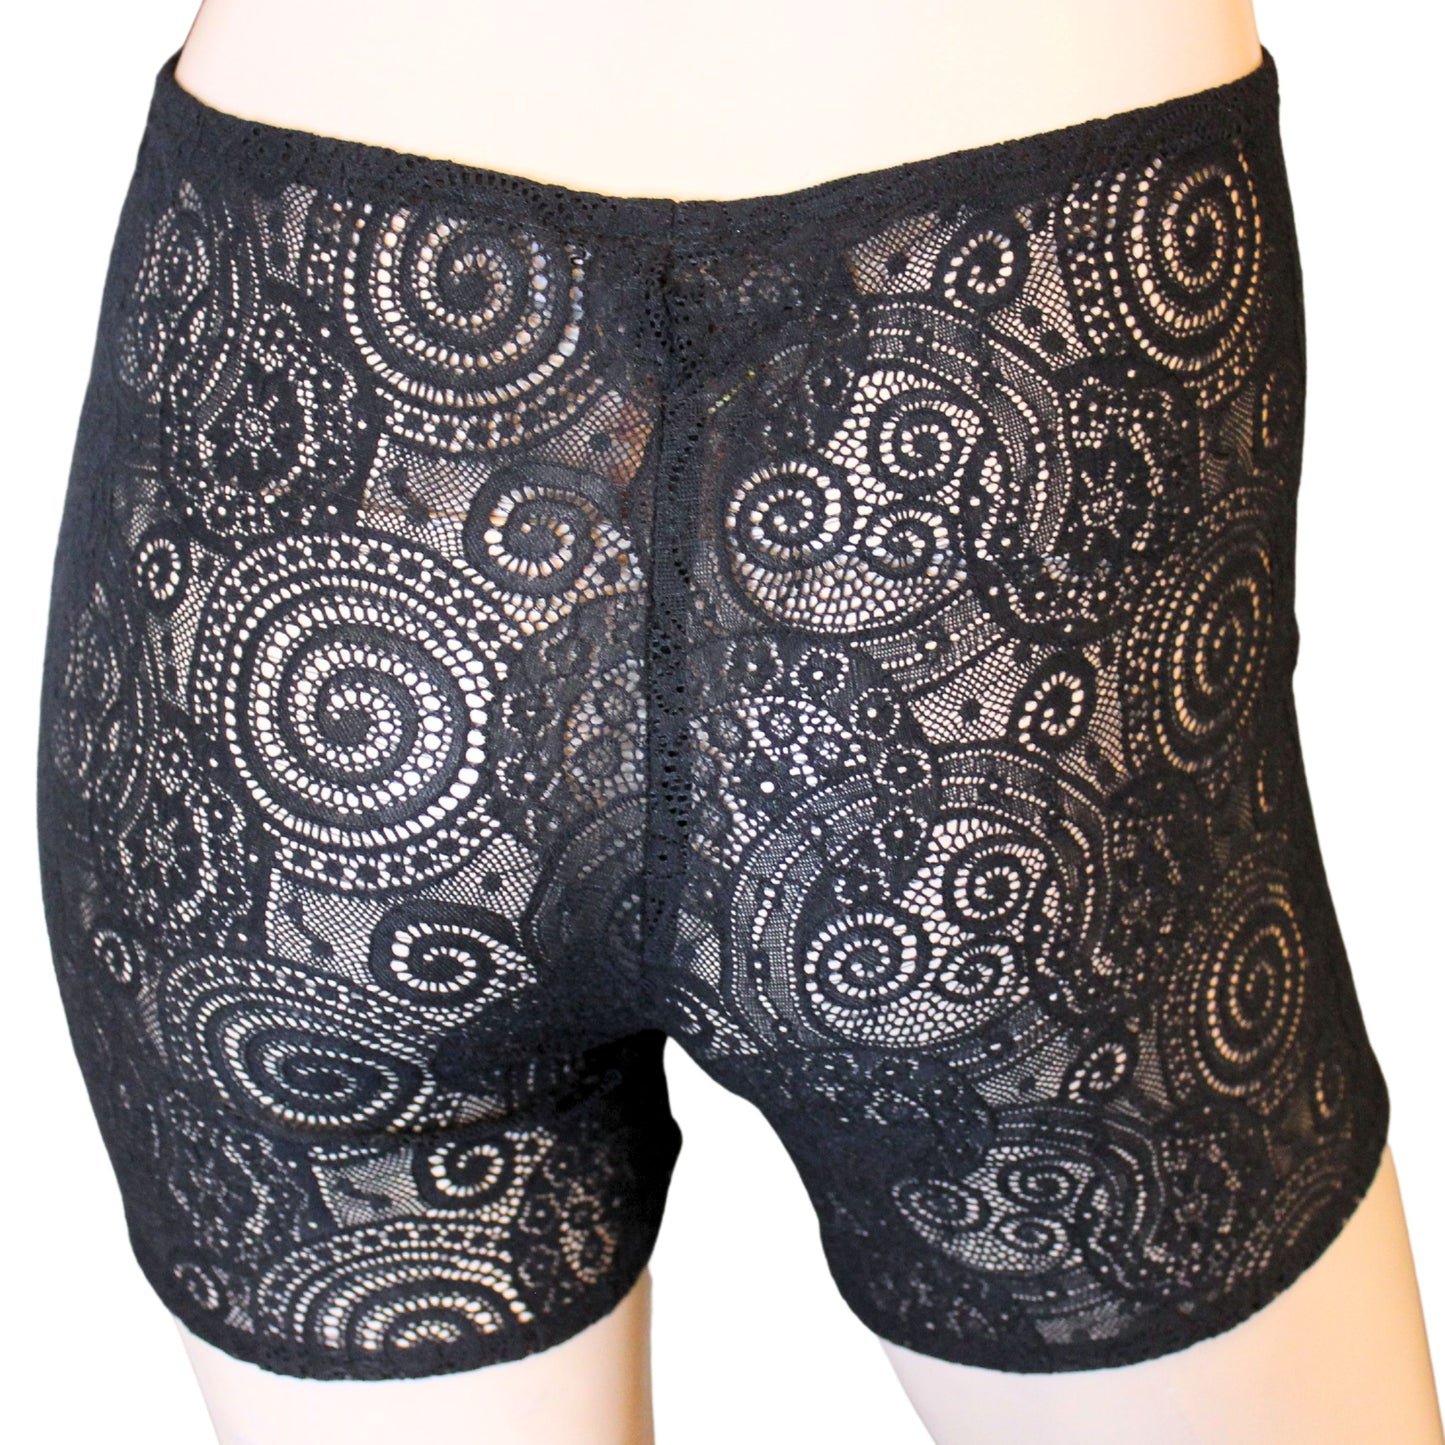 The VM Lace Tap Shorts